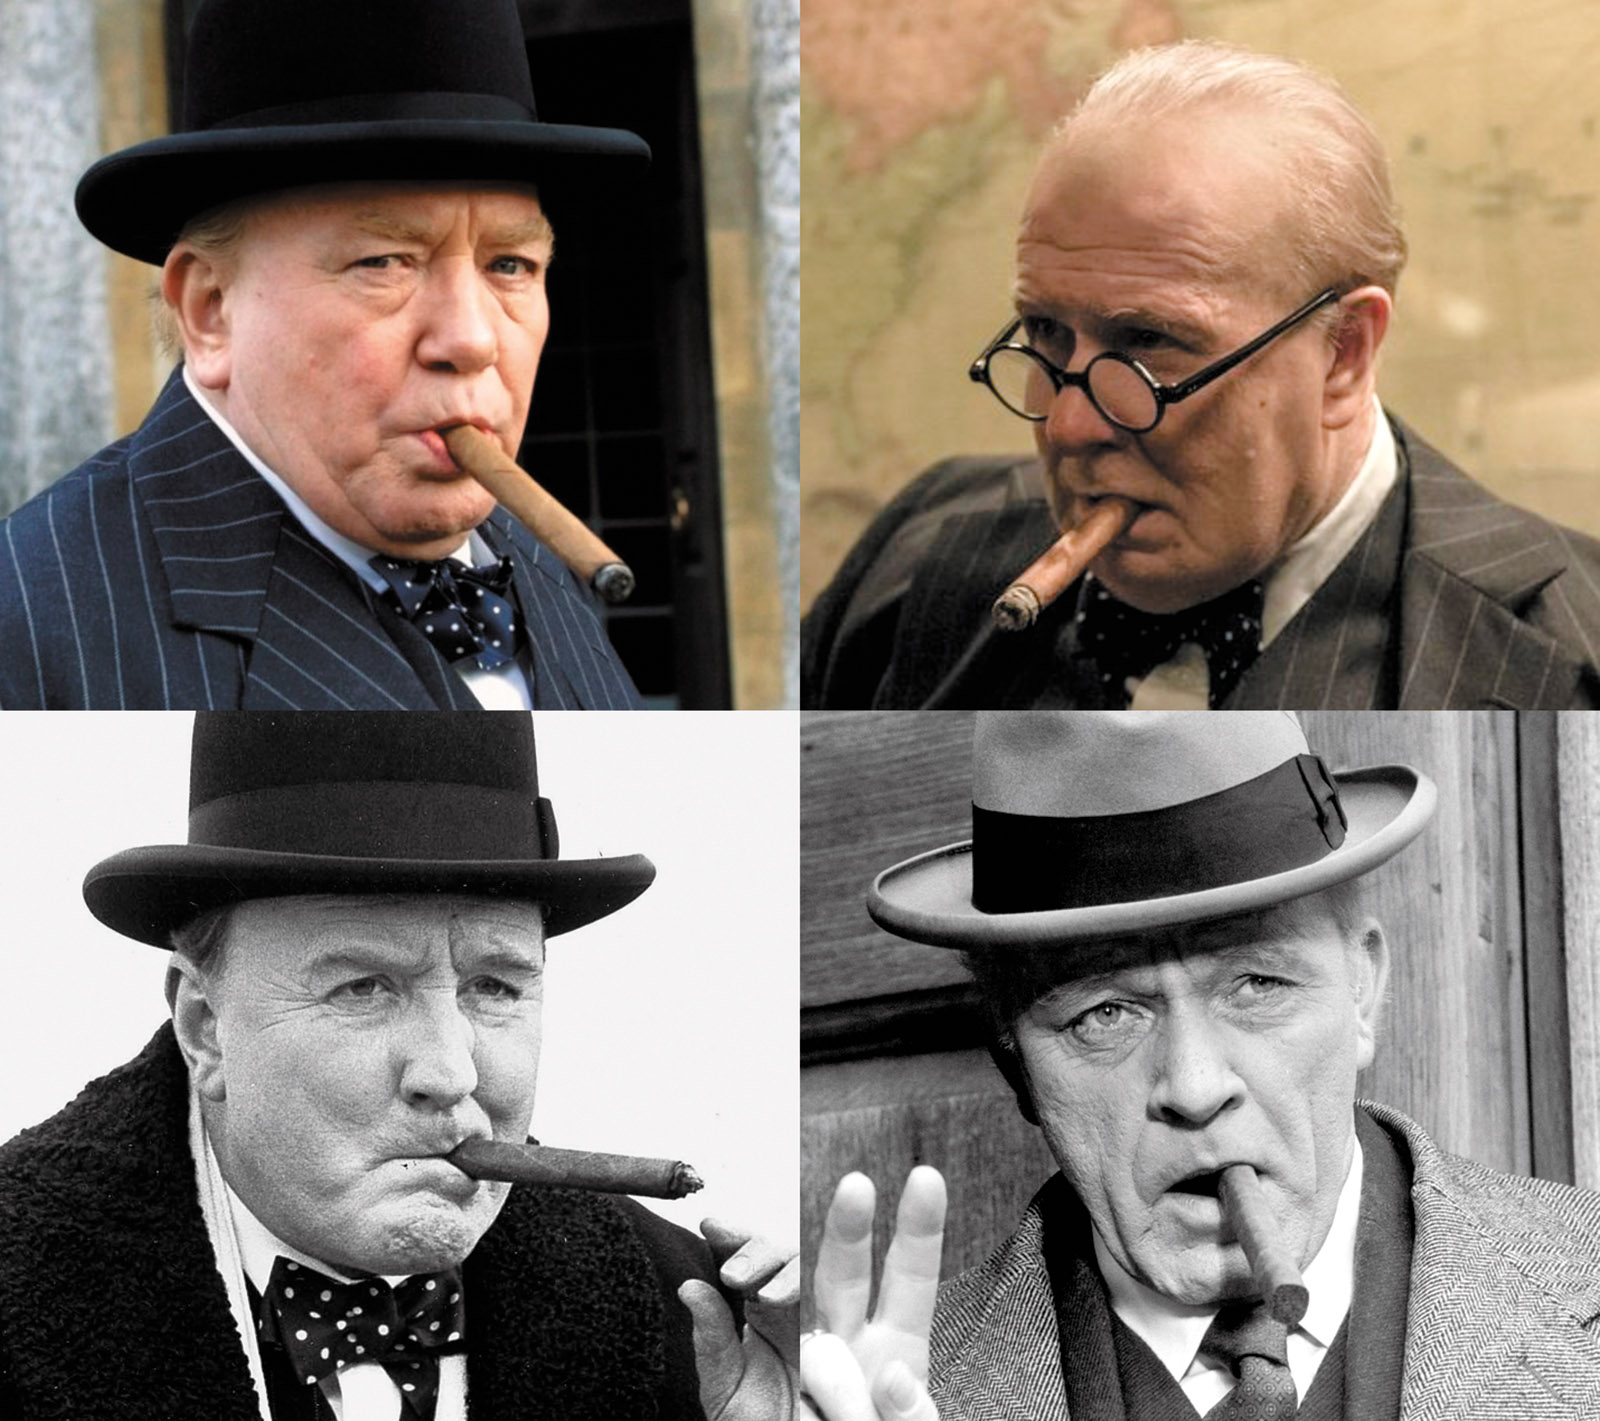 Four Churchills, clockwise from top left: Albert Finney in The Gathering Storm, 2002; Gary Oldman in Darkest Hour, 2017; Richard Burton in Walk With Destiny, 1974; and Robert Hardy in The Wilderness Years, 1981